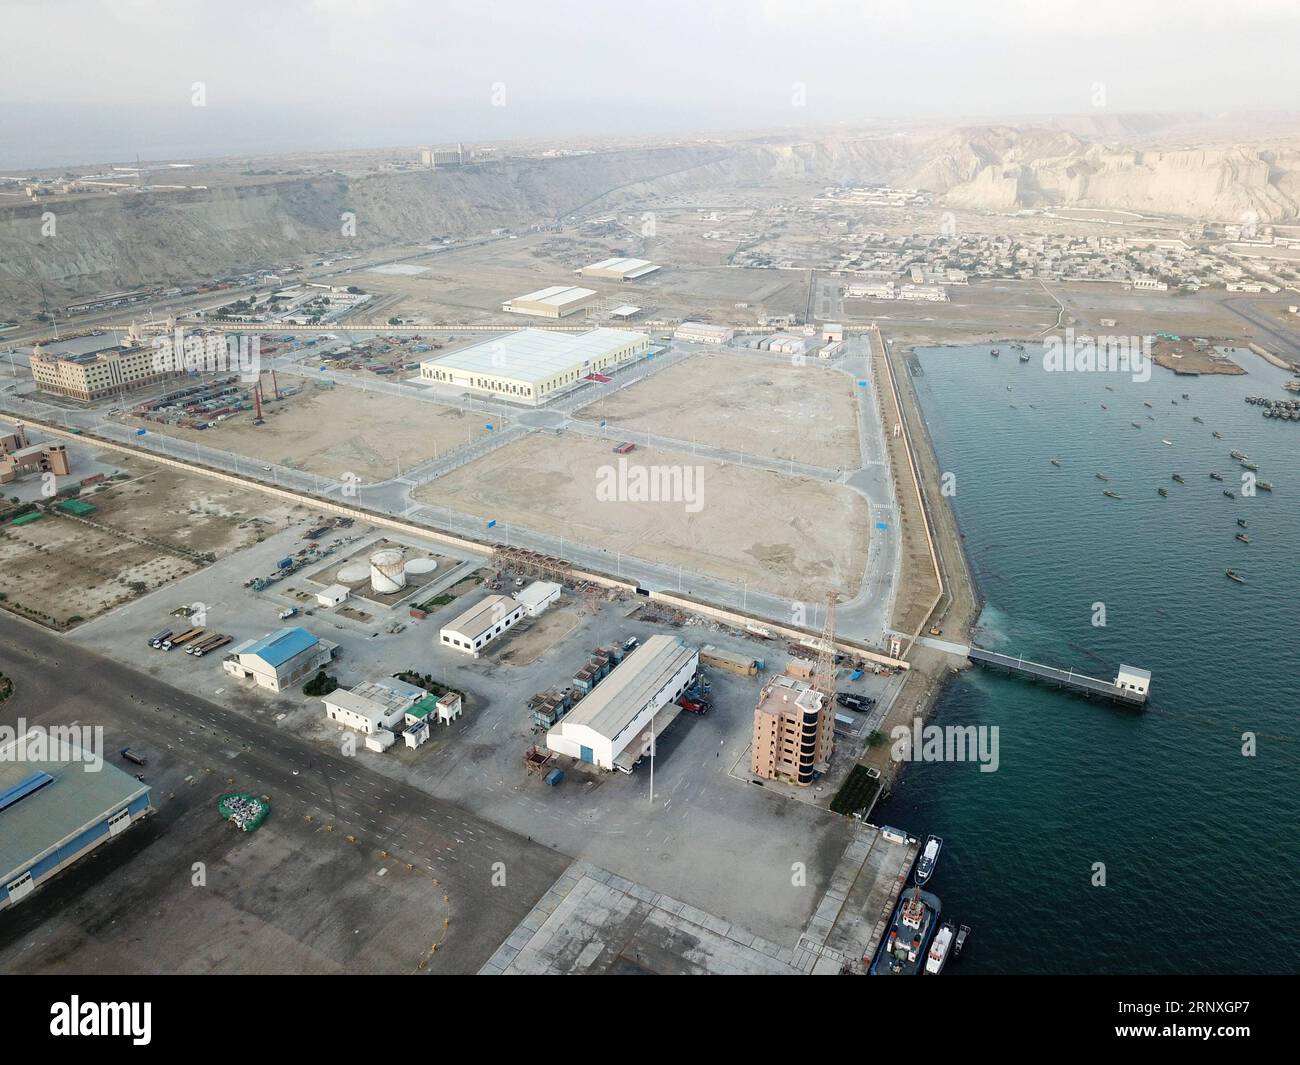 (180129) -- GWADAR, Jan. 29, 2018 -- Photo taken on Jan. 29, 2018 shows a view of Gwadar free zone in southwest Pakistan s Gwadar. The first phase of Gwadar Port s Free Zone in southwestern Pakistan was inaugurated on Monday by Prime Minister Shahid Khaqan Abbasi, who commented that the free zone would help facilitate regional and global trade under the China-Pakistan Economic Corridor (CPEC). ) (psw) PAKISTAN-GWADAR-FREE ZONE AhmadxKamal PUBLICATIONxNOTxINxCHN Stock Photo